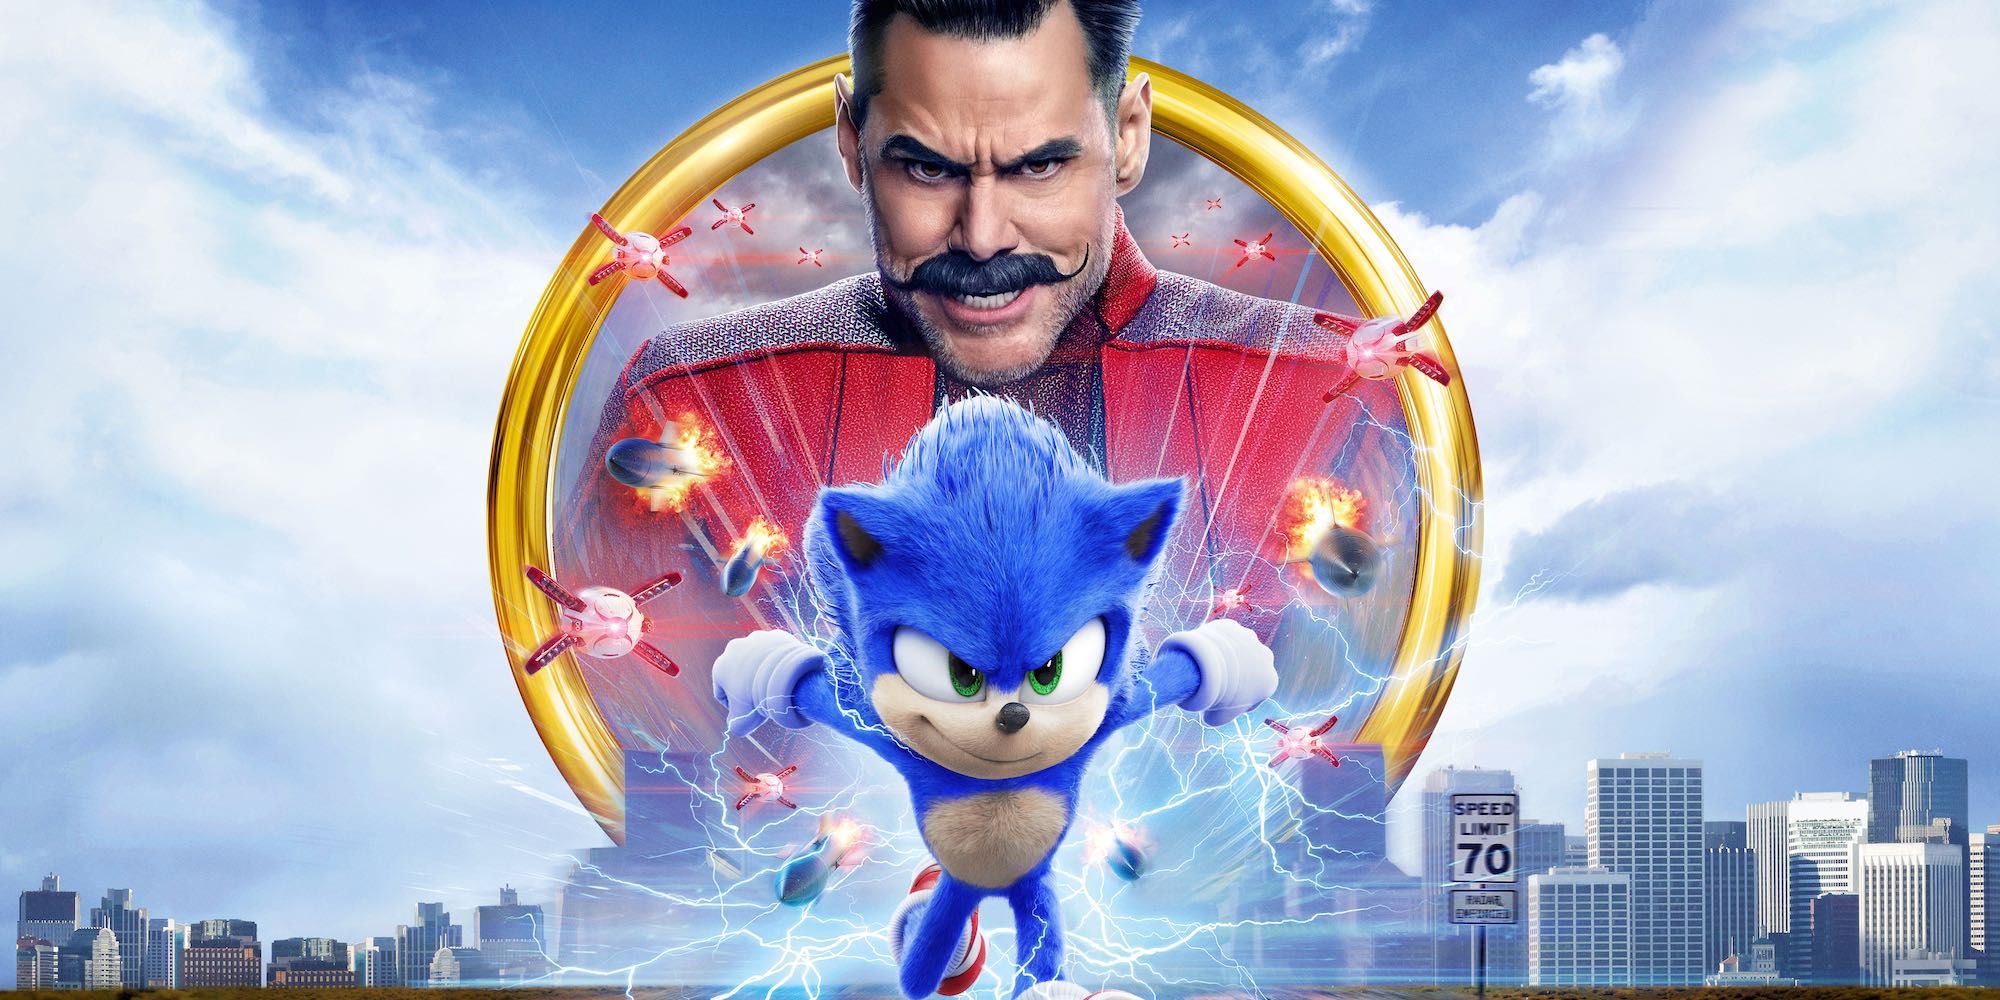 Sonic the Hedgehog (2020) - Does it hold up? - Royals Review